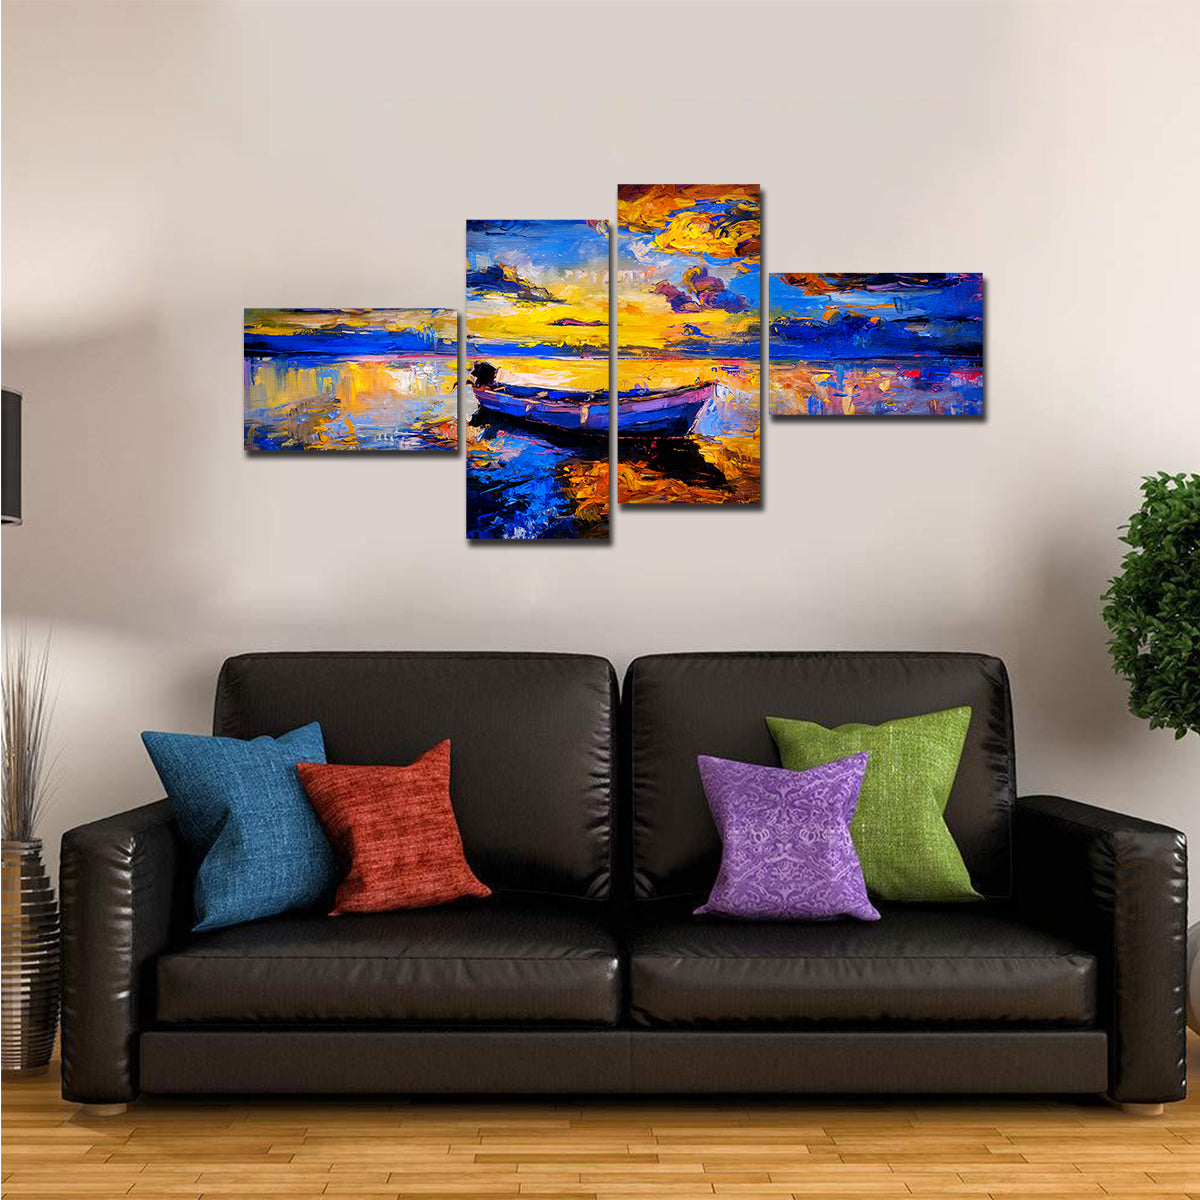 Premium Wall Painting of Sky Sunset and Boat on the Water